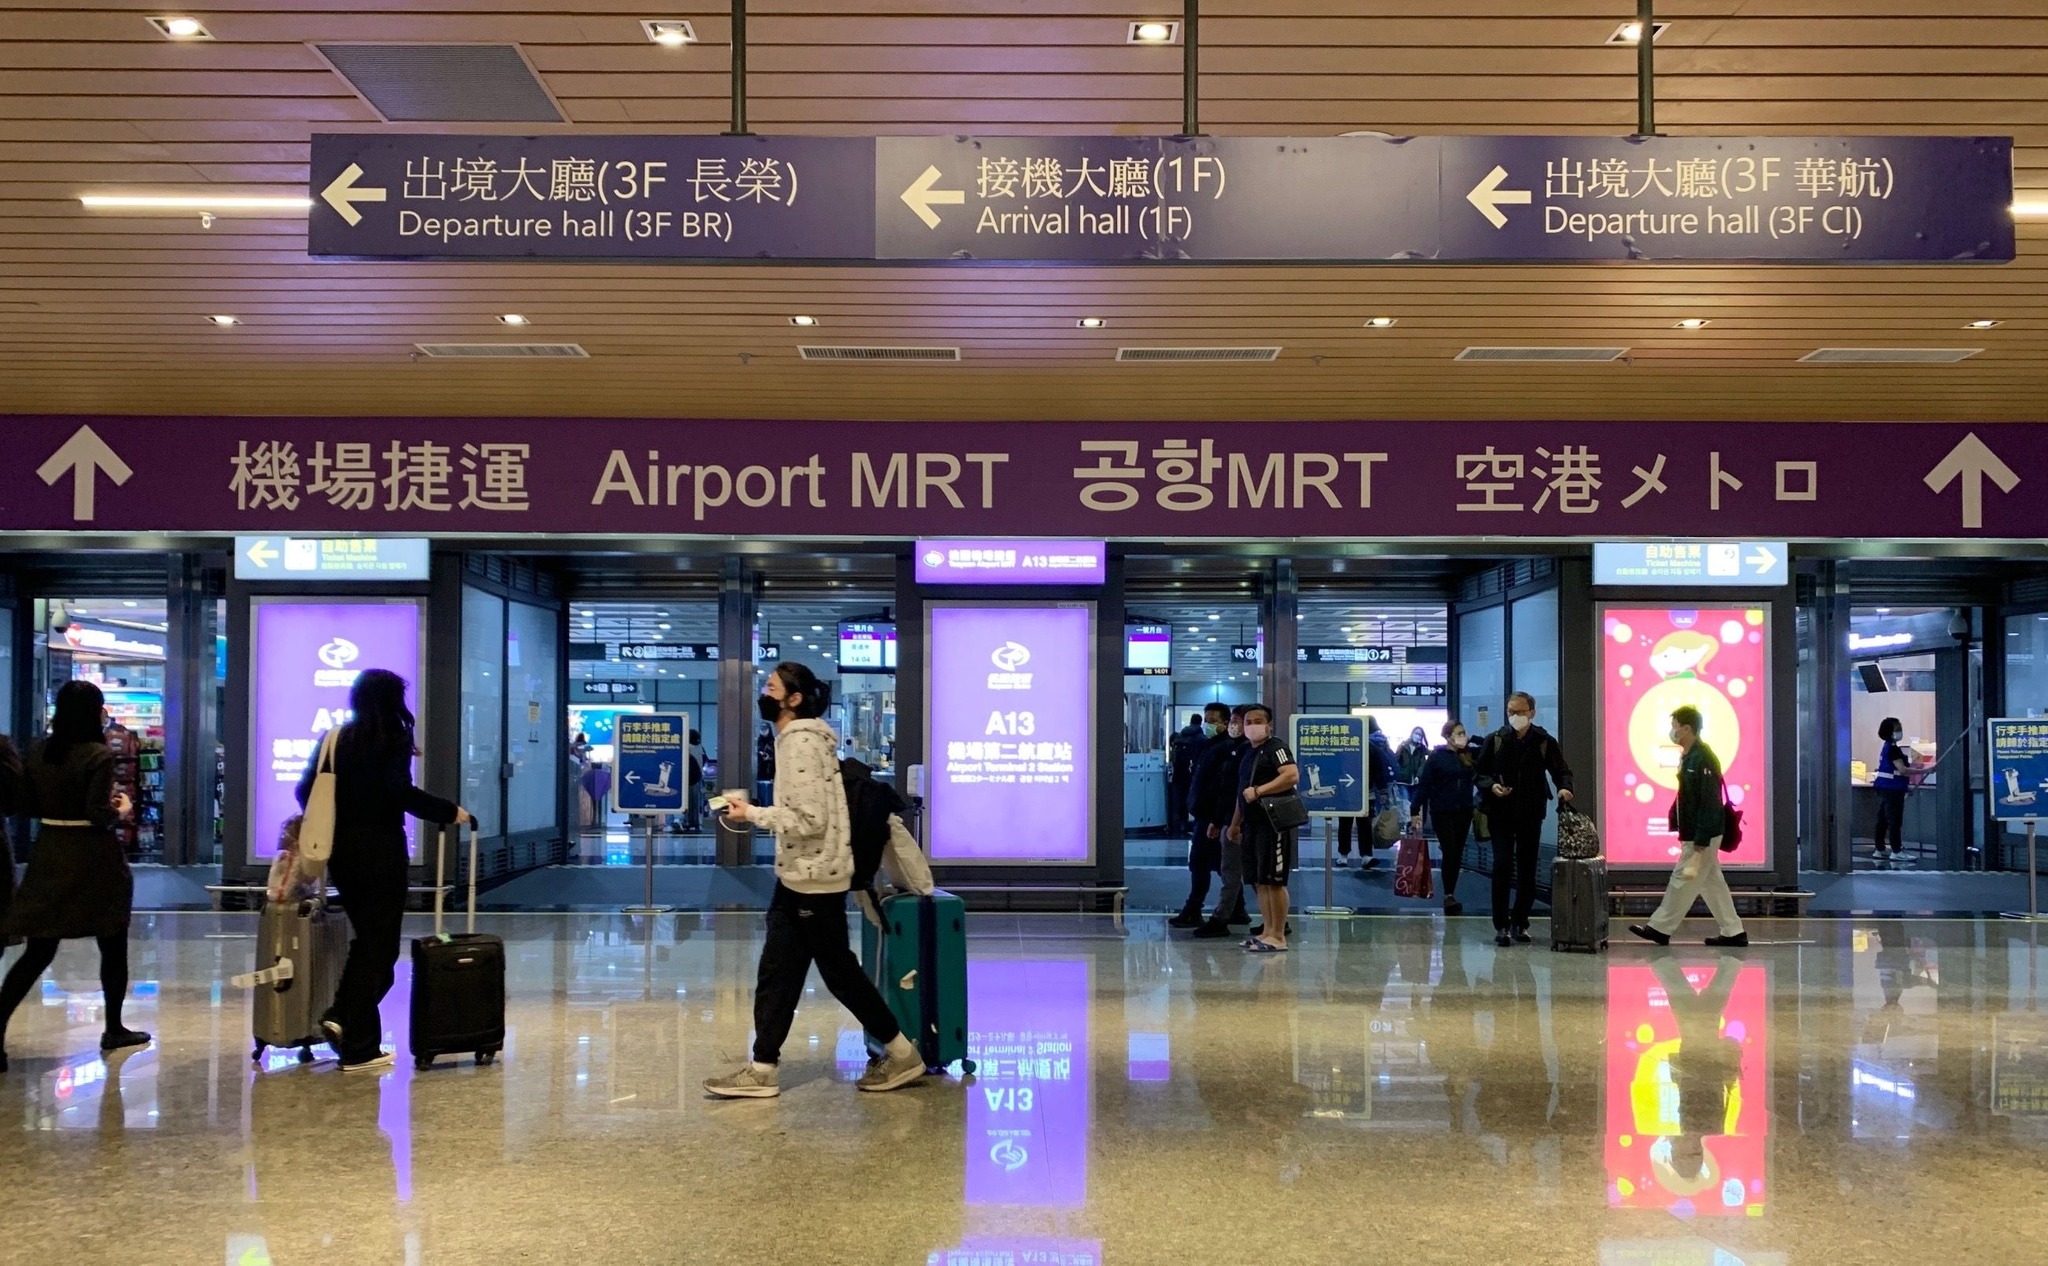 Taoyuan Airport MRT and Metro Taipei to add runs and multilingual arriving announcement for increasing foreign travelers.  Photo provided by Taoyuan Airport MRT